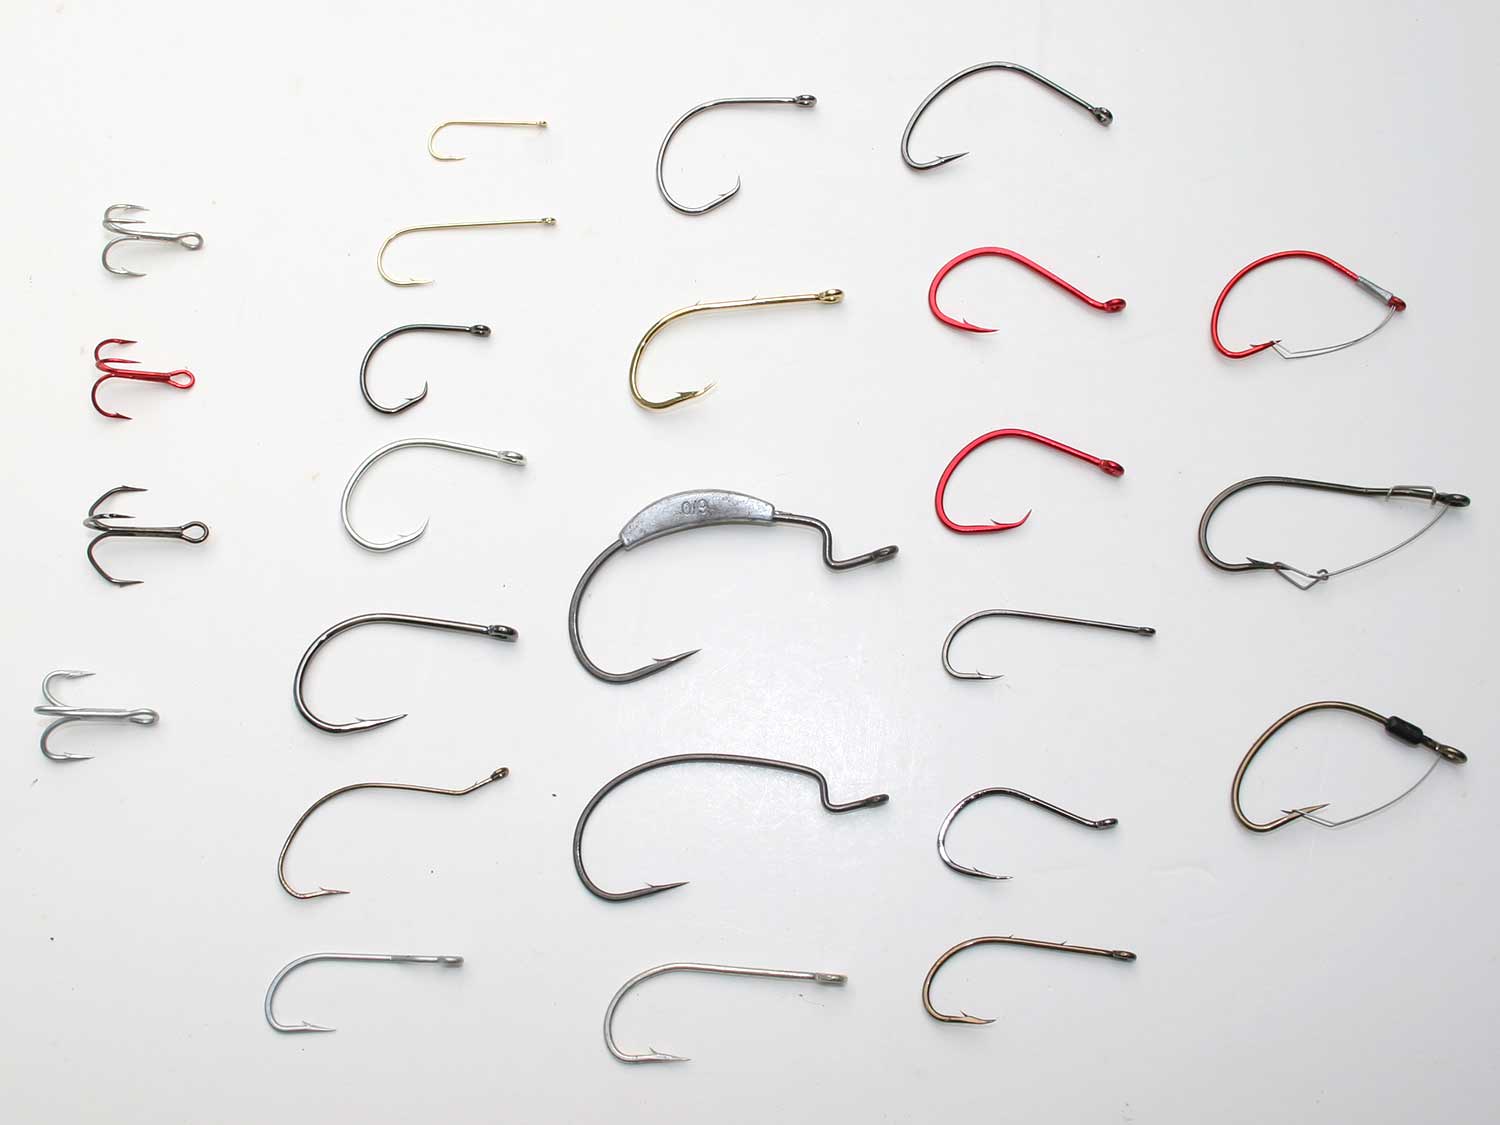  Offset-Worm-Hooks-for-Bass-Fishing-Rubber-Worms -Ewg-Wide-Gap-Bass-Hooks Freshwater Texas Rig Soft Plastics Worms Bait Fishing  Hook Black Red Colored 1/0 2/0 3/0 4/0